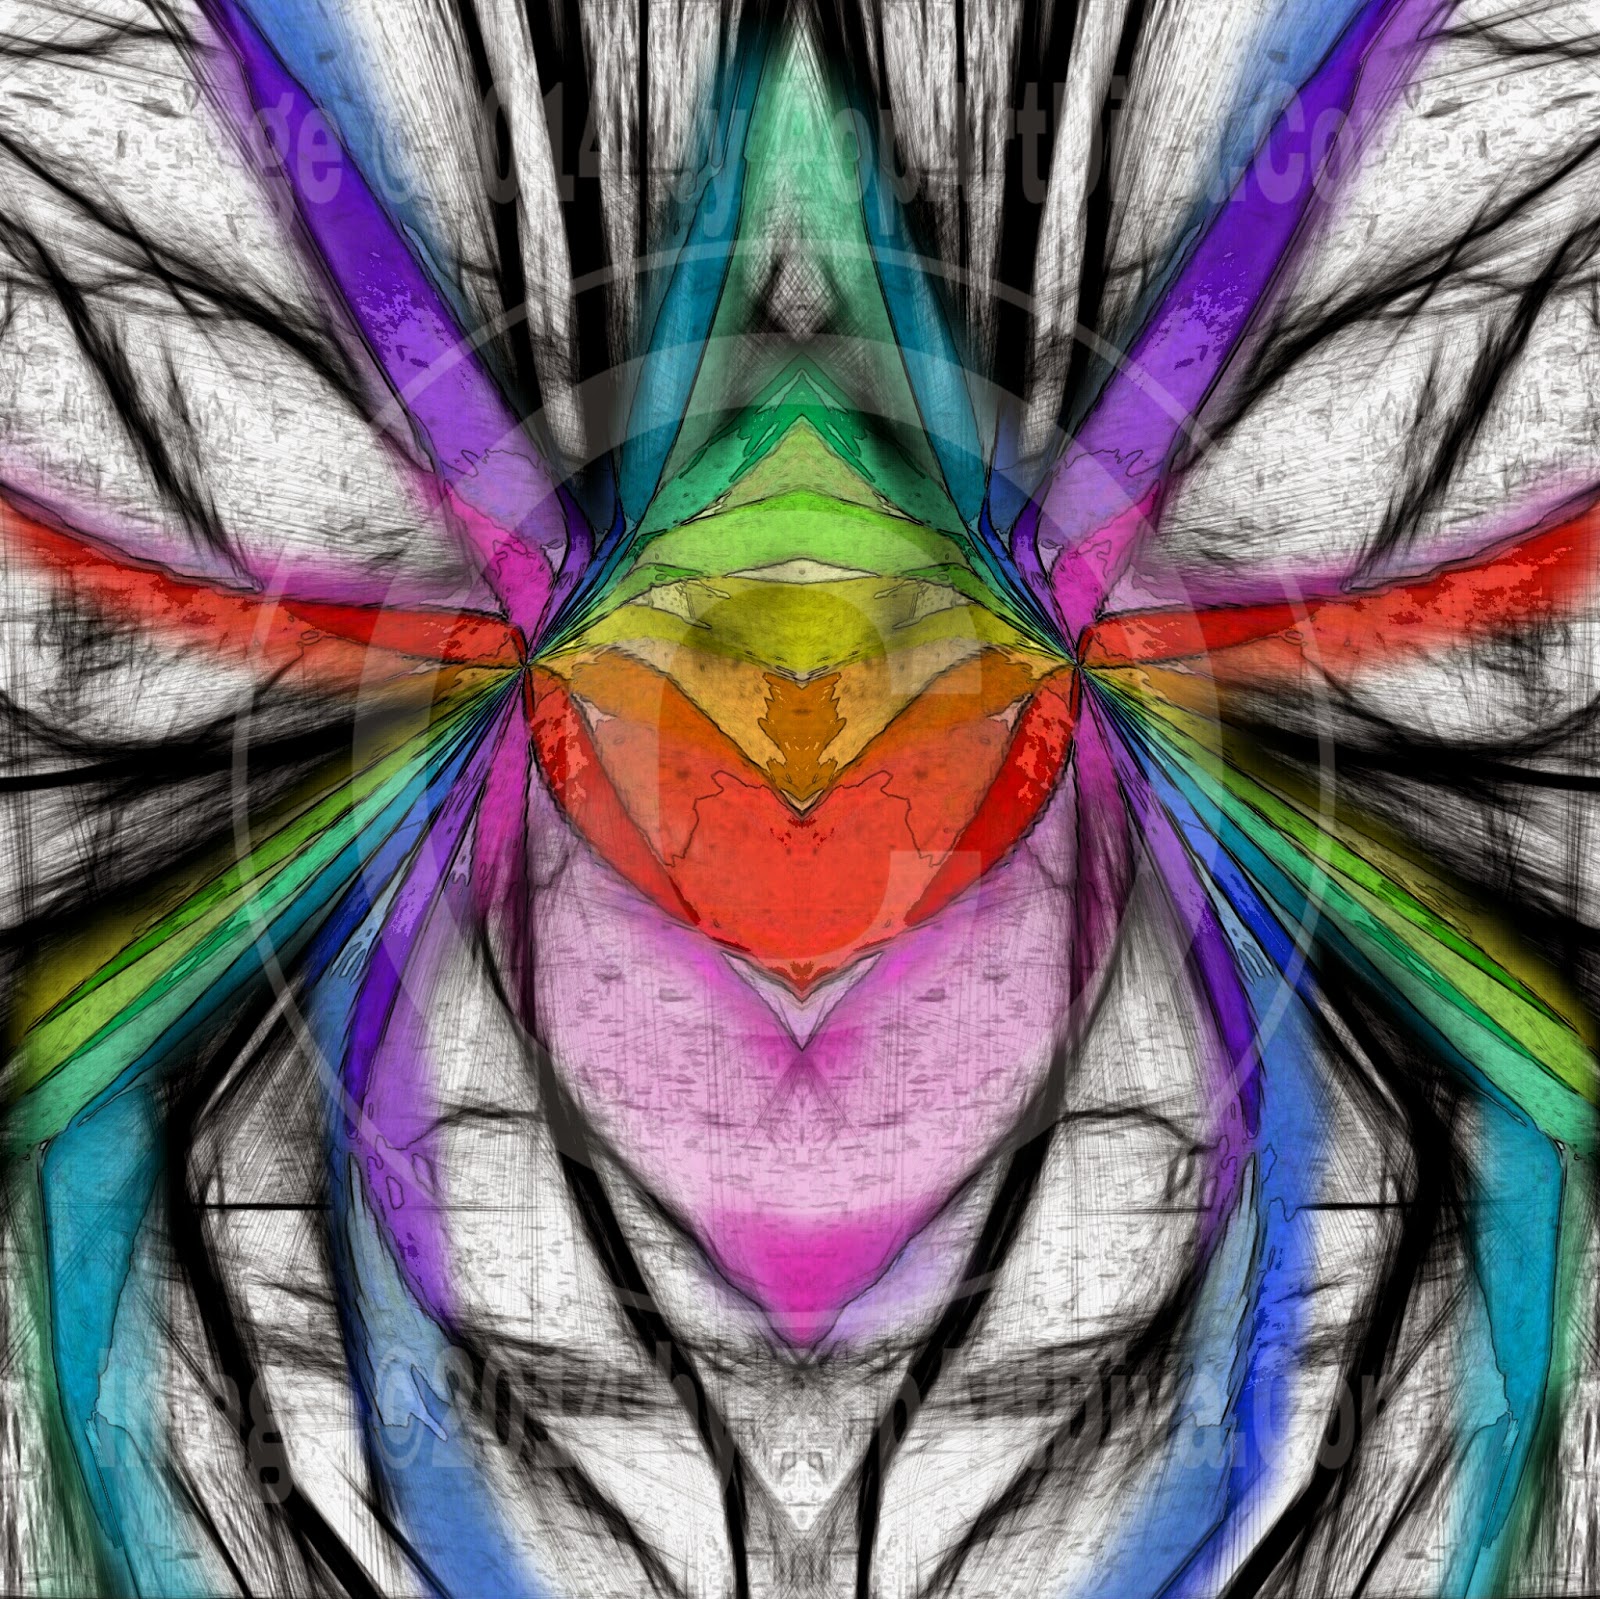 http://store.payloadz.com/details/2084289-photos-and-images-clip-art-kaleidoscope-abstract-spider-web-graphic.html